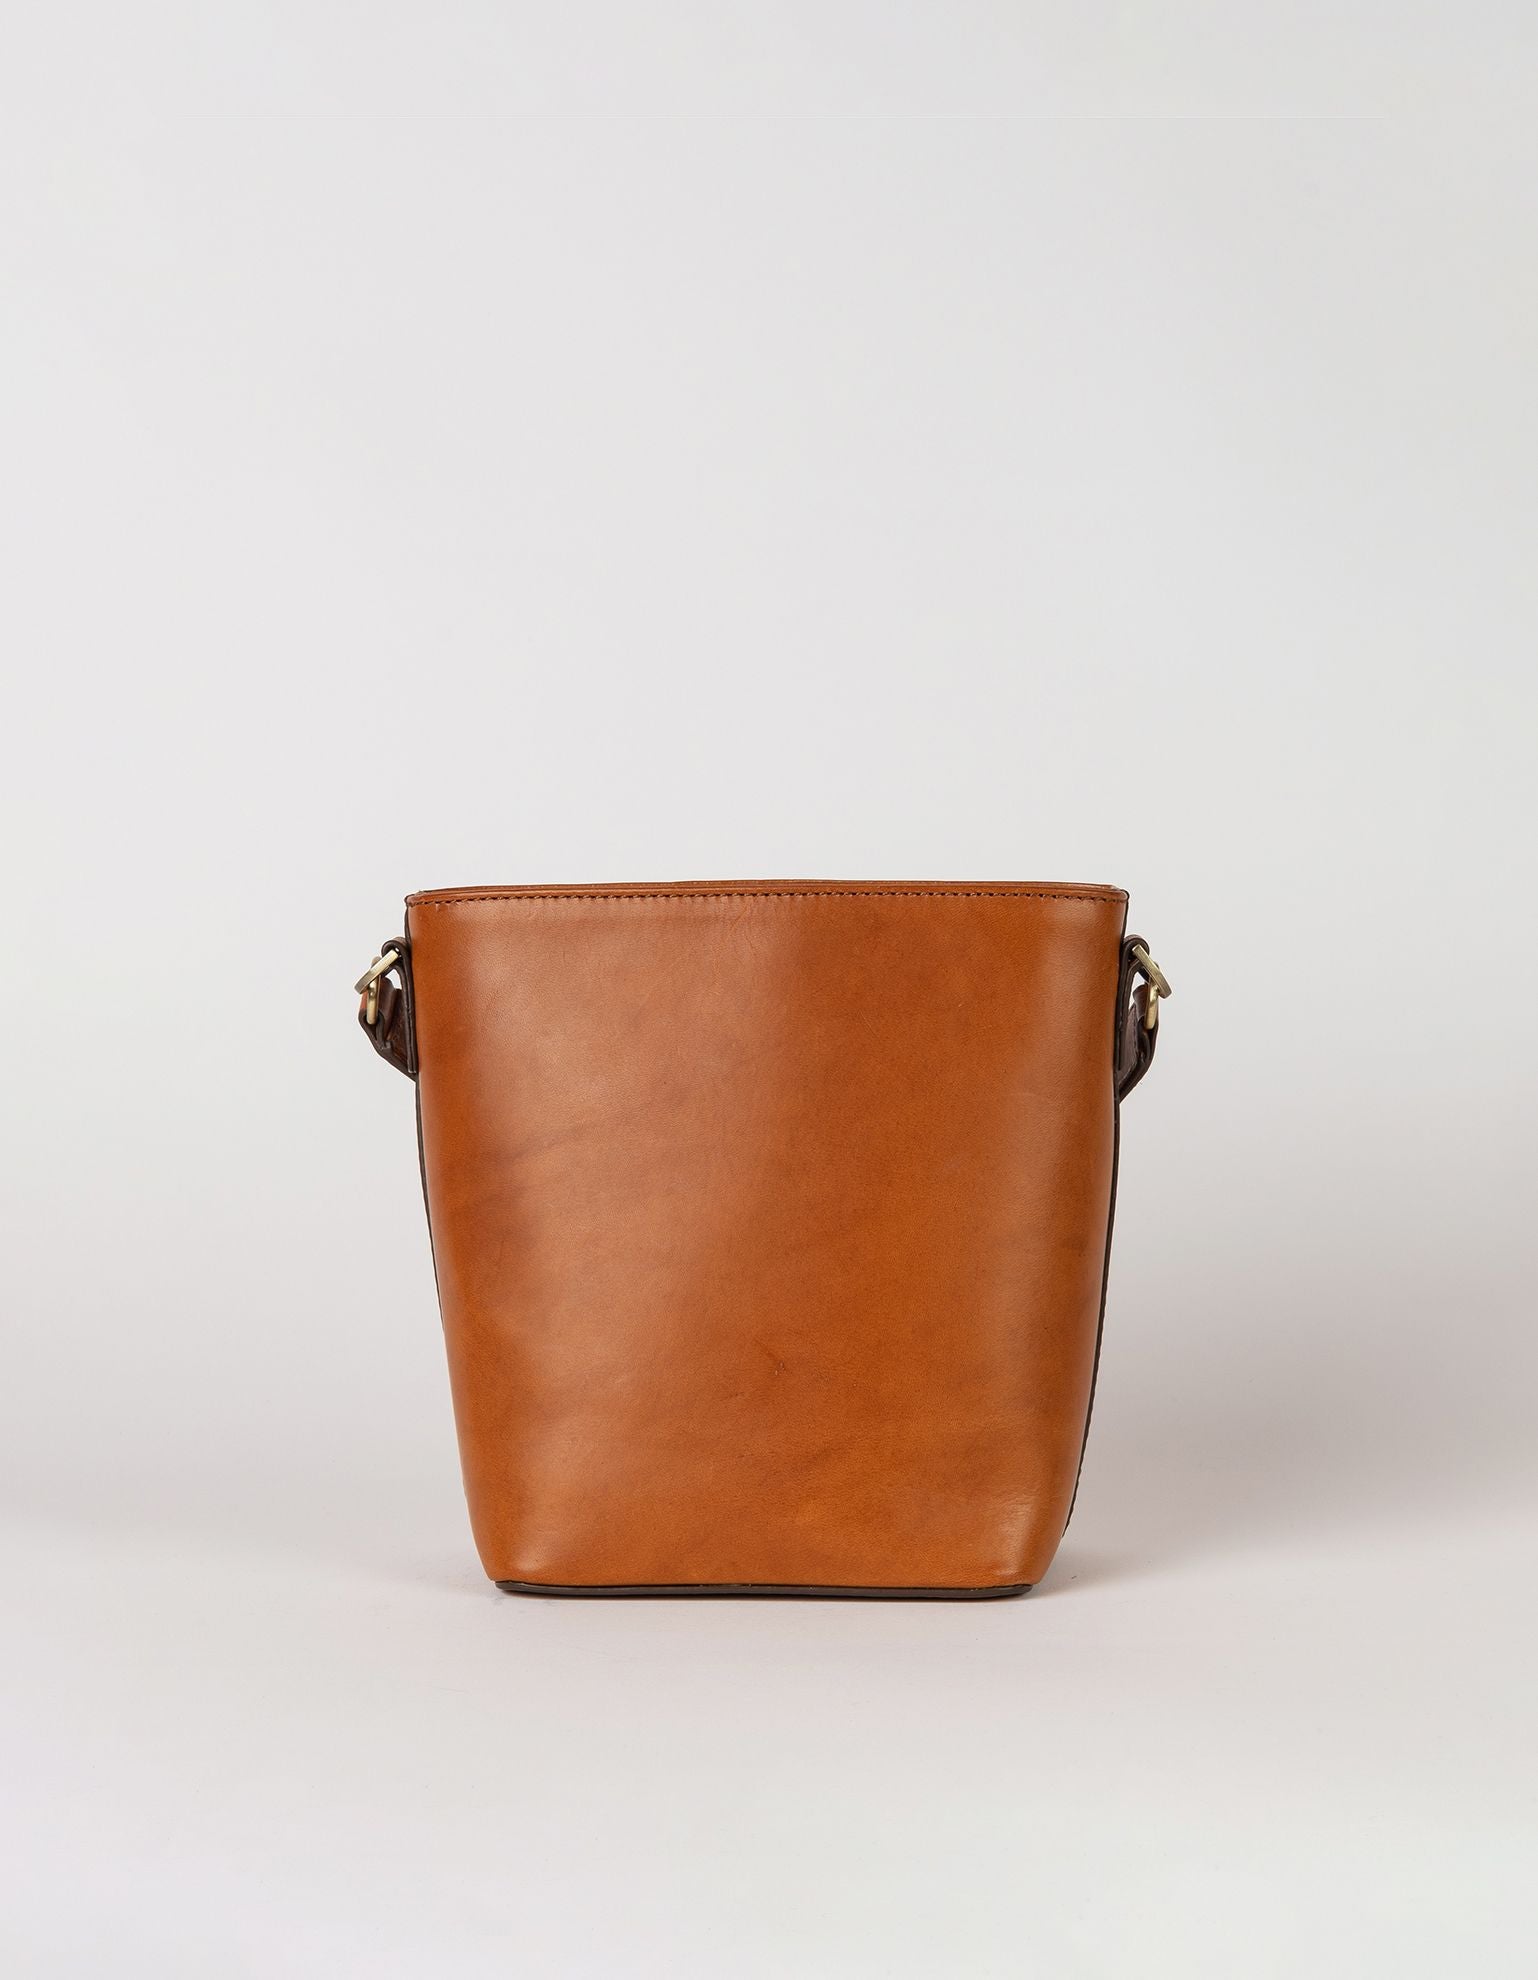 Small Cognac Bucket bag. Removable straps. Back product image